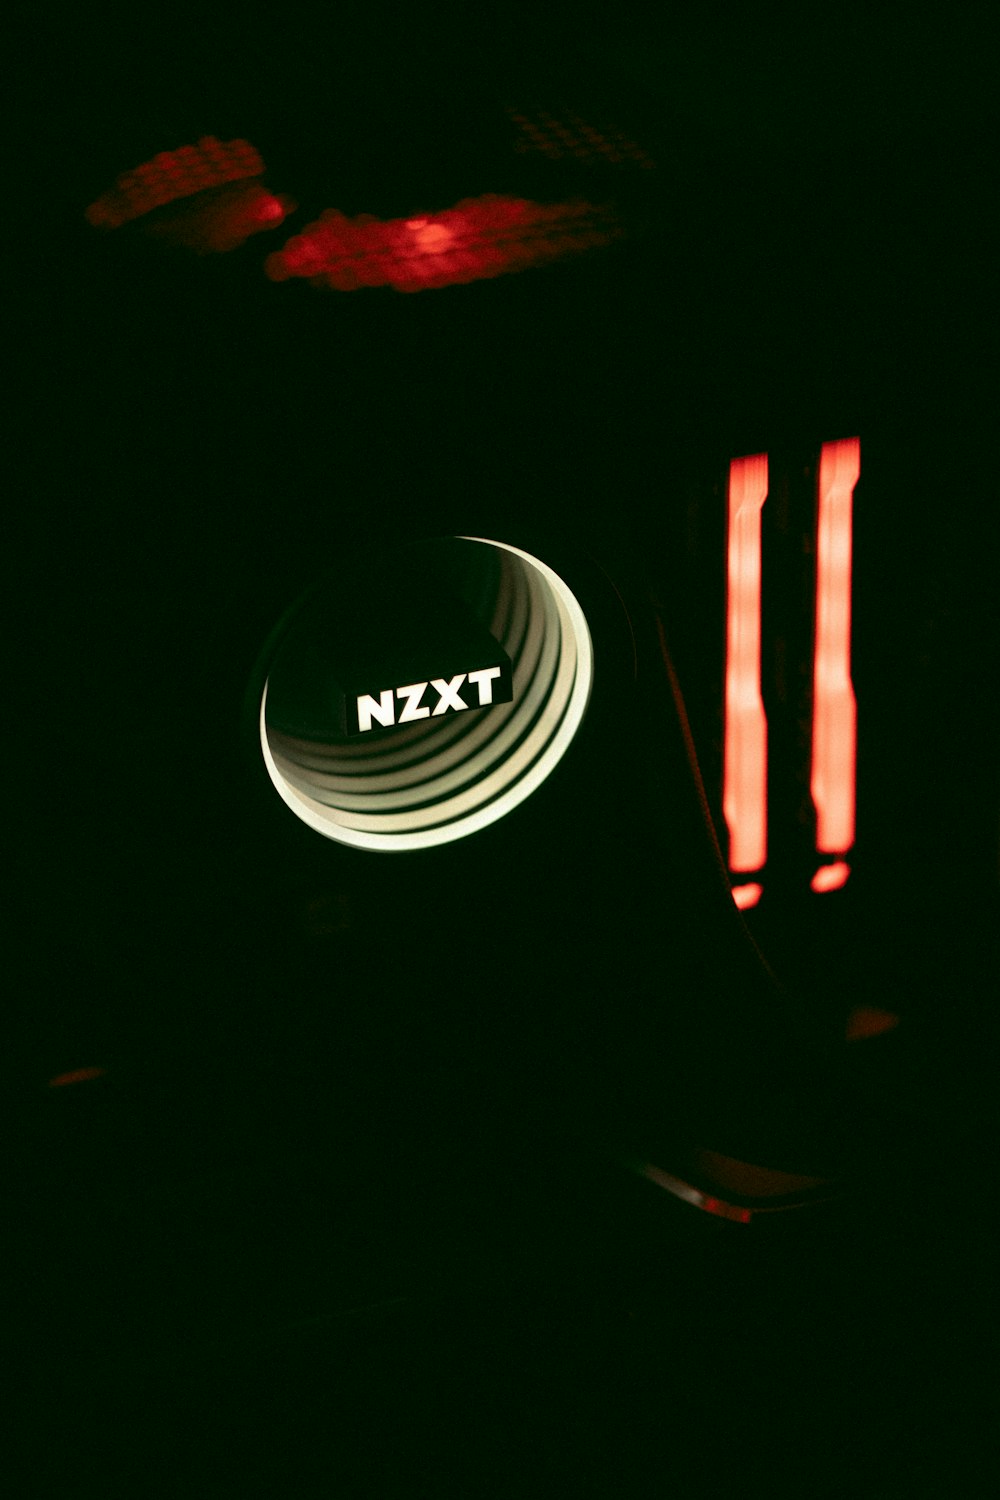 a close up of a button on a car in the dark